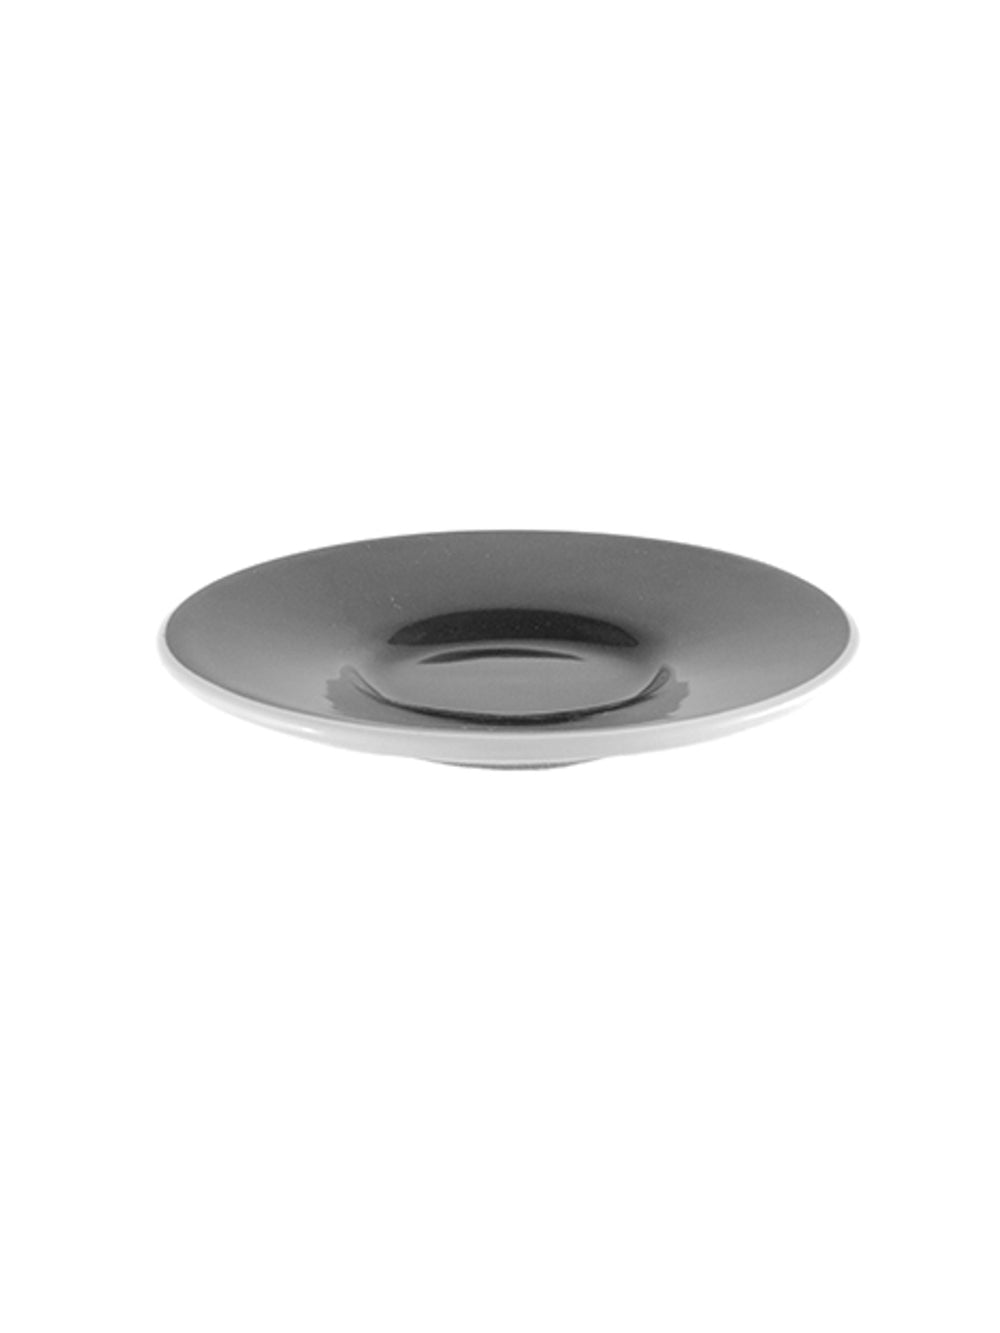 Photo of CREATED CO. Angle Espresso Saucer (Saucer Only) ( Grey ) [ Created Co. ] [ Coffee Cups ]